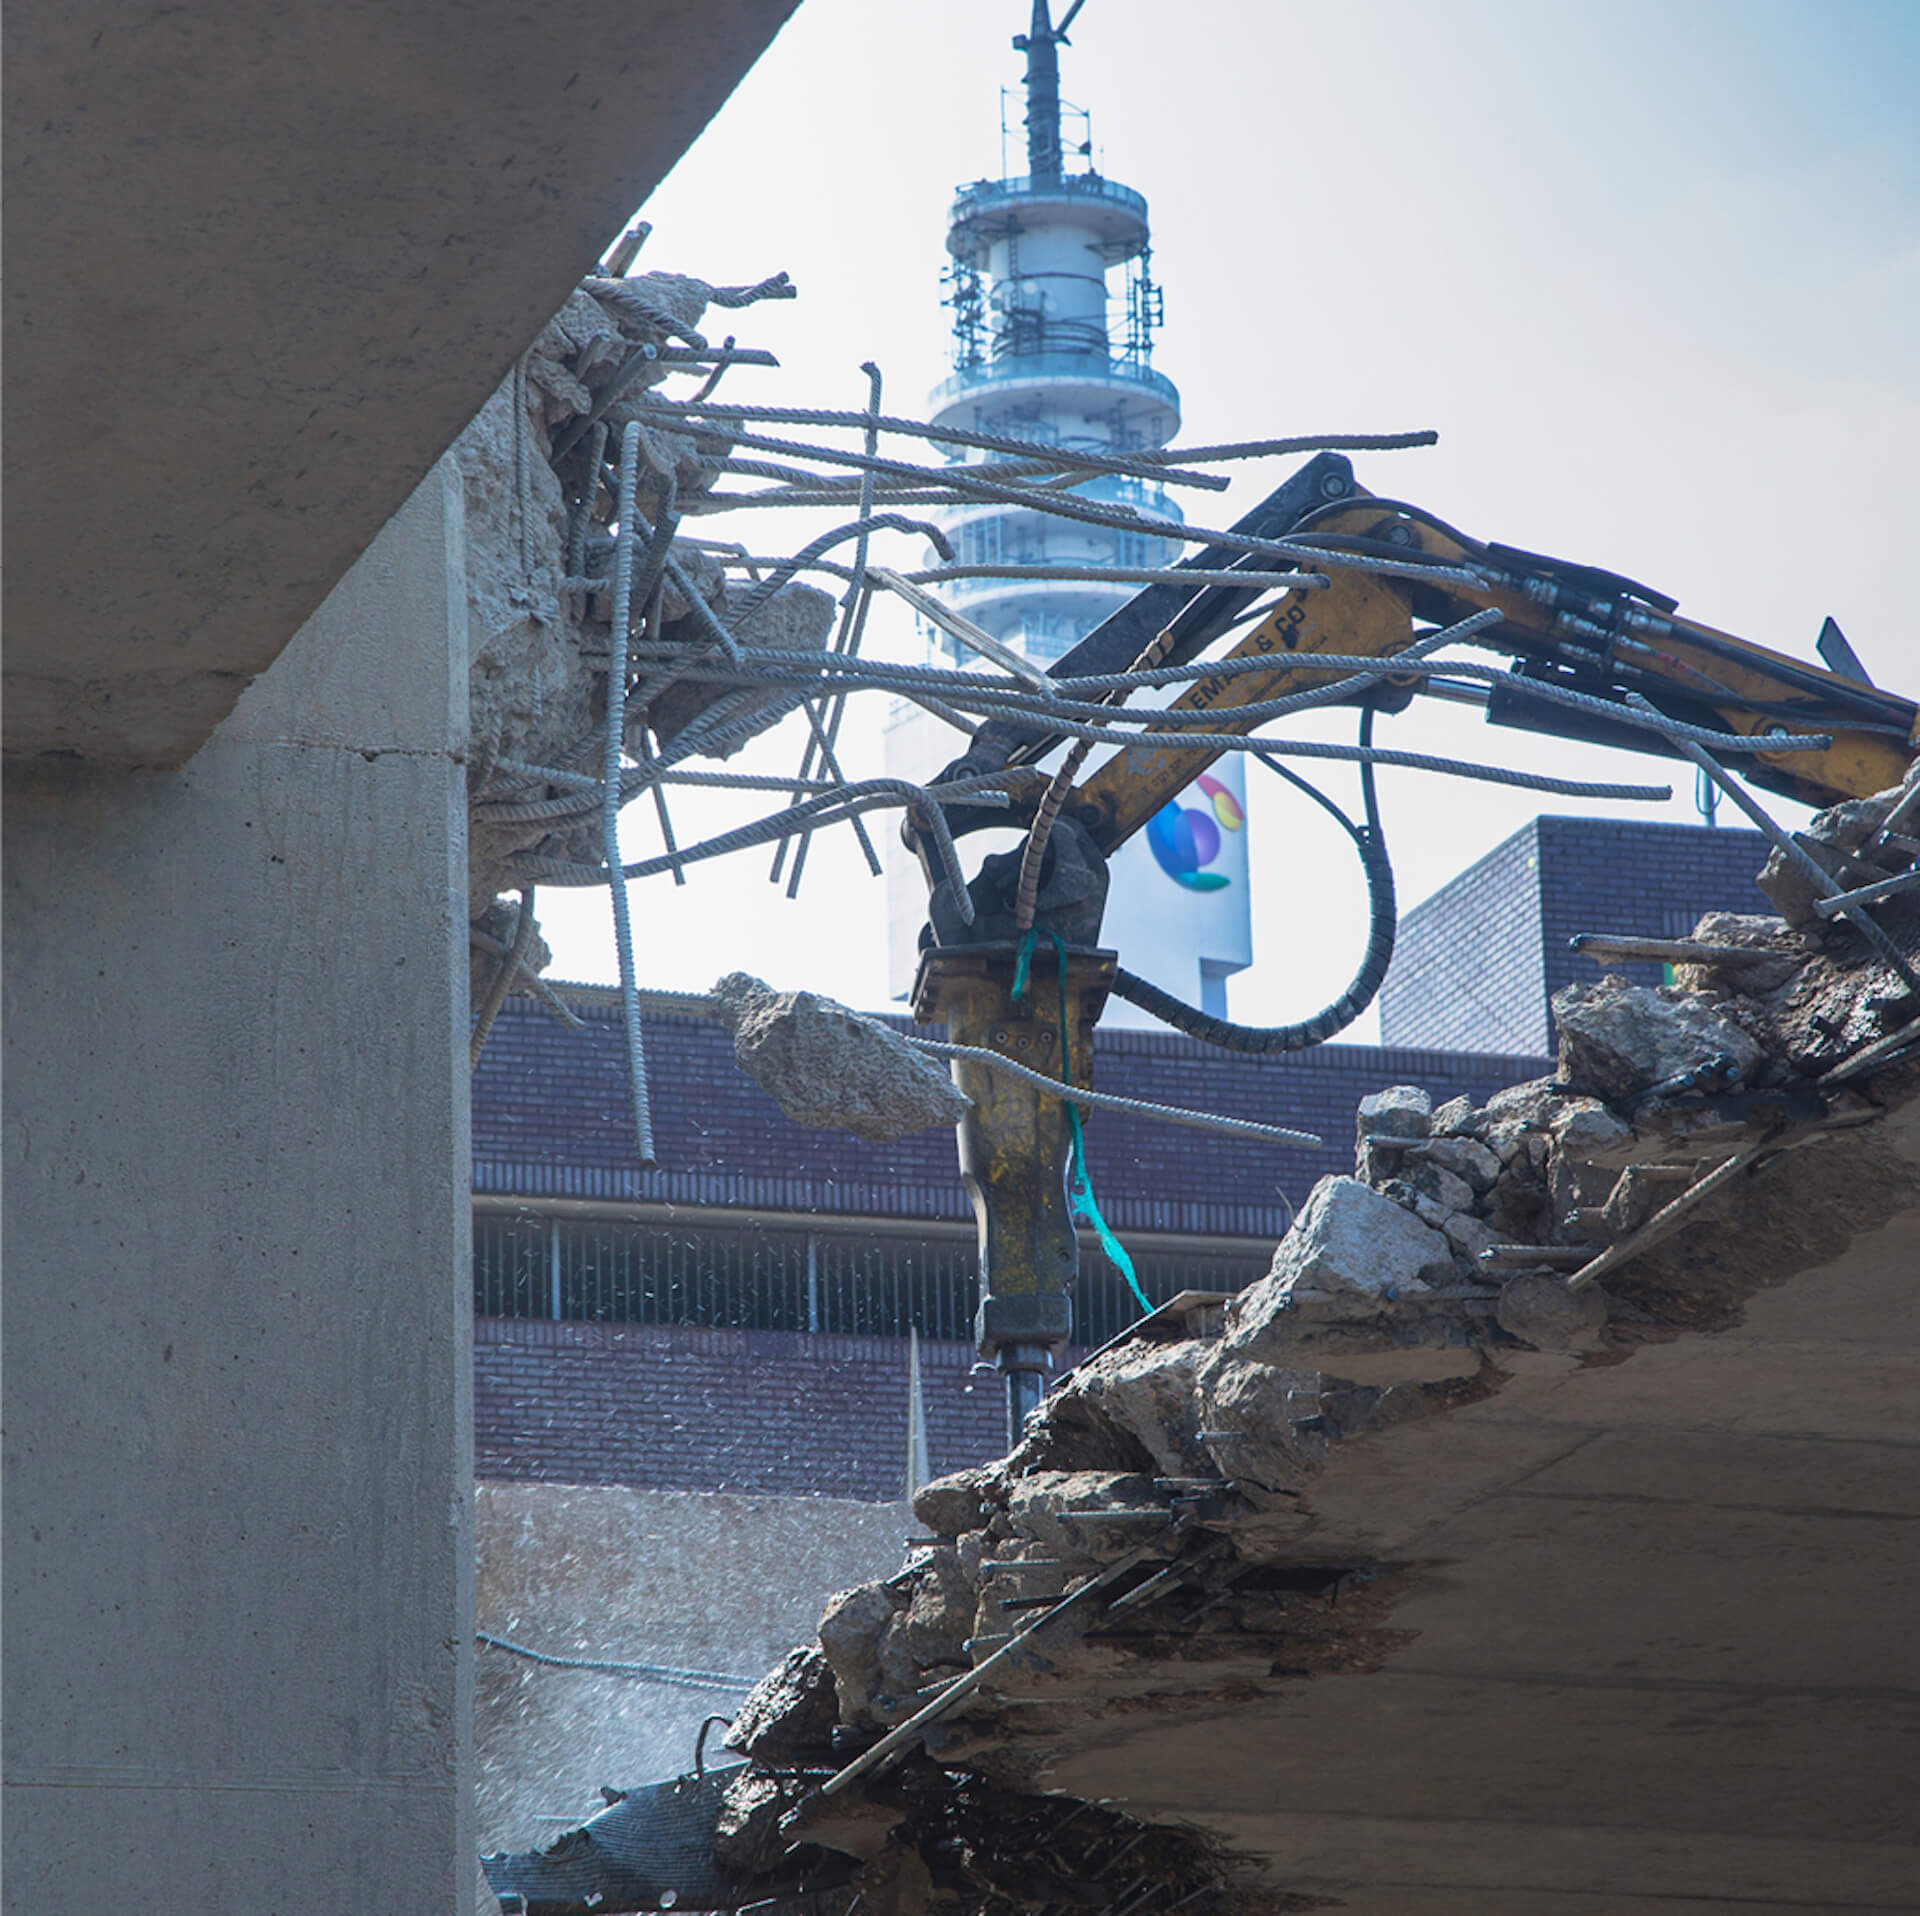 image of robotic demolition on a demolition site. Image shows the head of a Brokk machine drilling into concrete roof